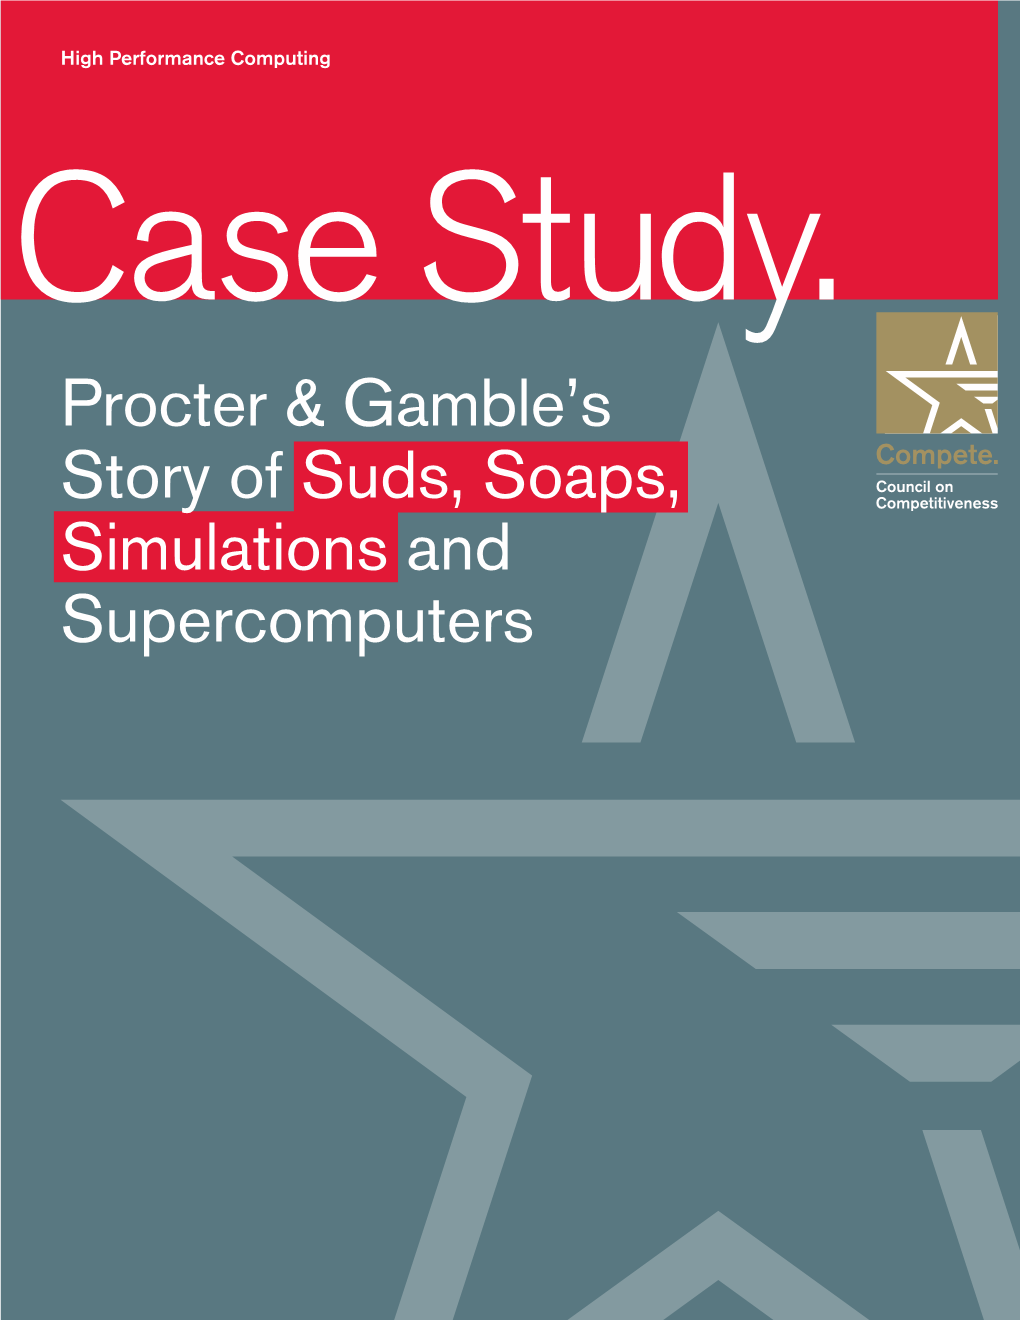 Procter & Gamble's Story of Suds, Soaps, Simulations And